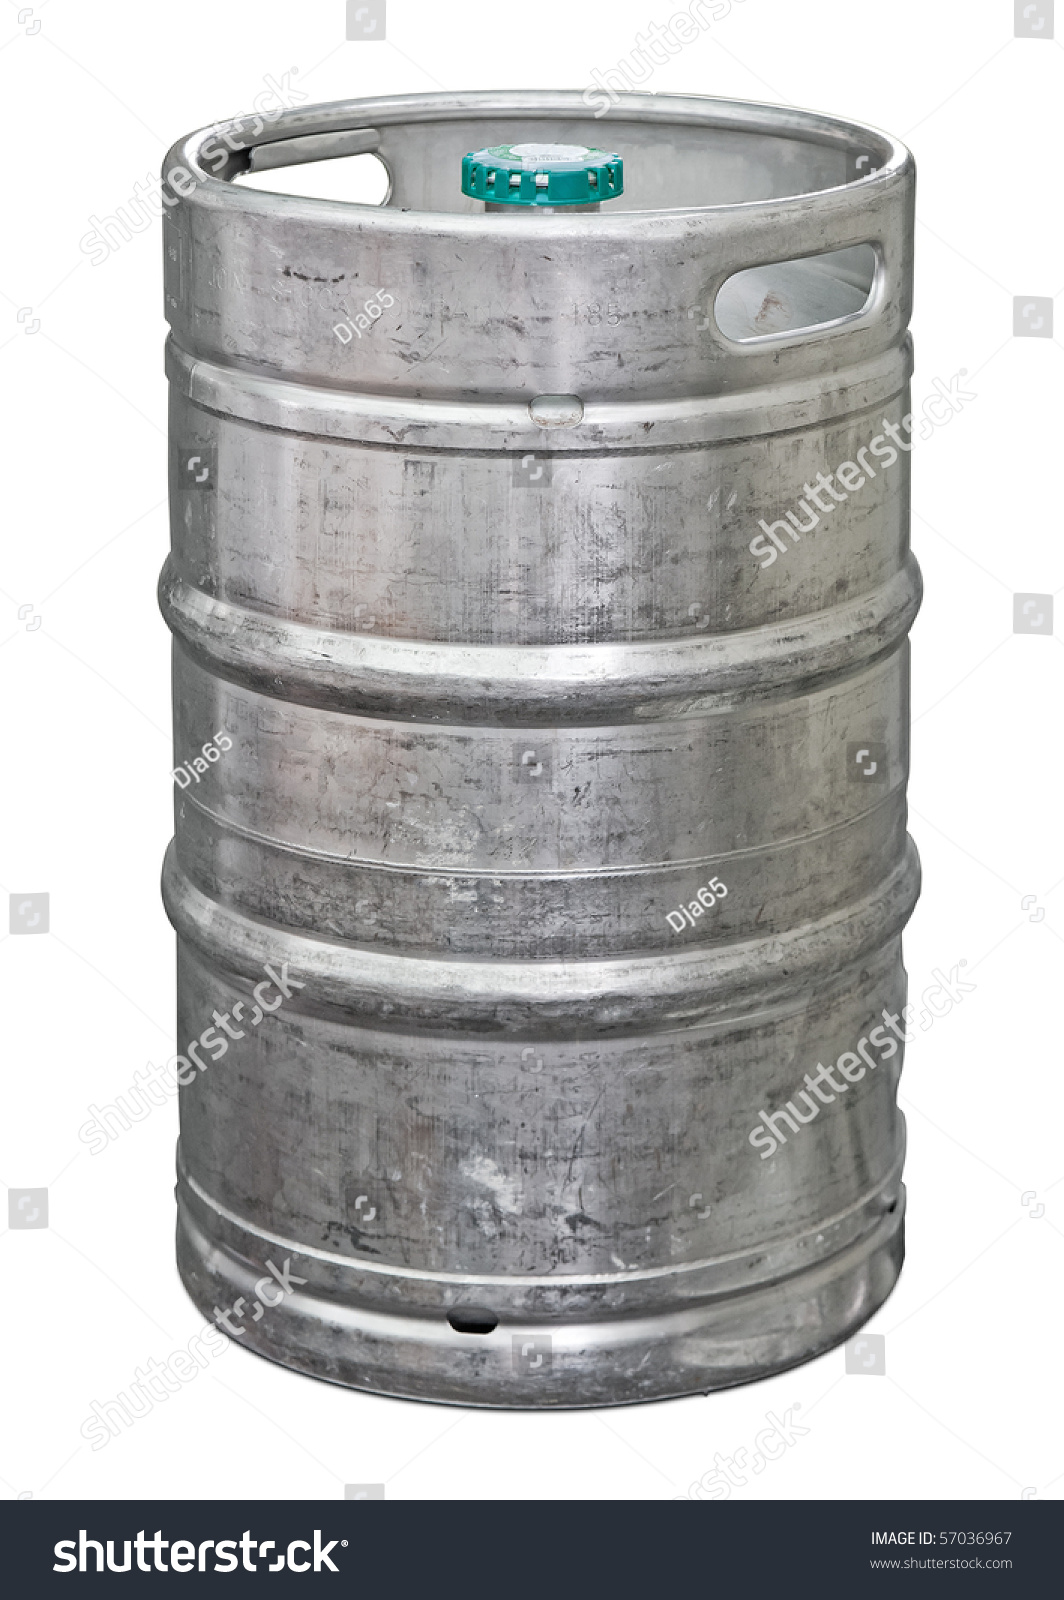 Metal beer keg isolated. Clipping path included #57036967